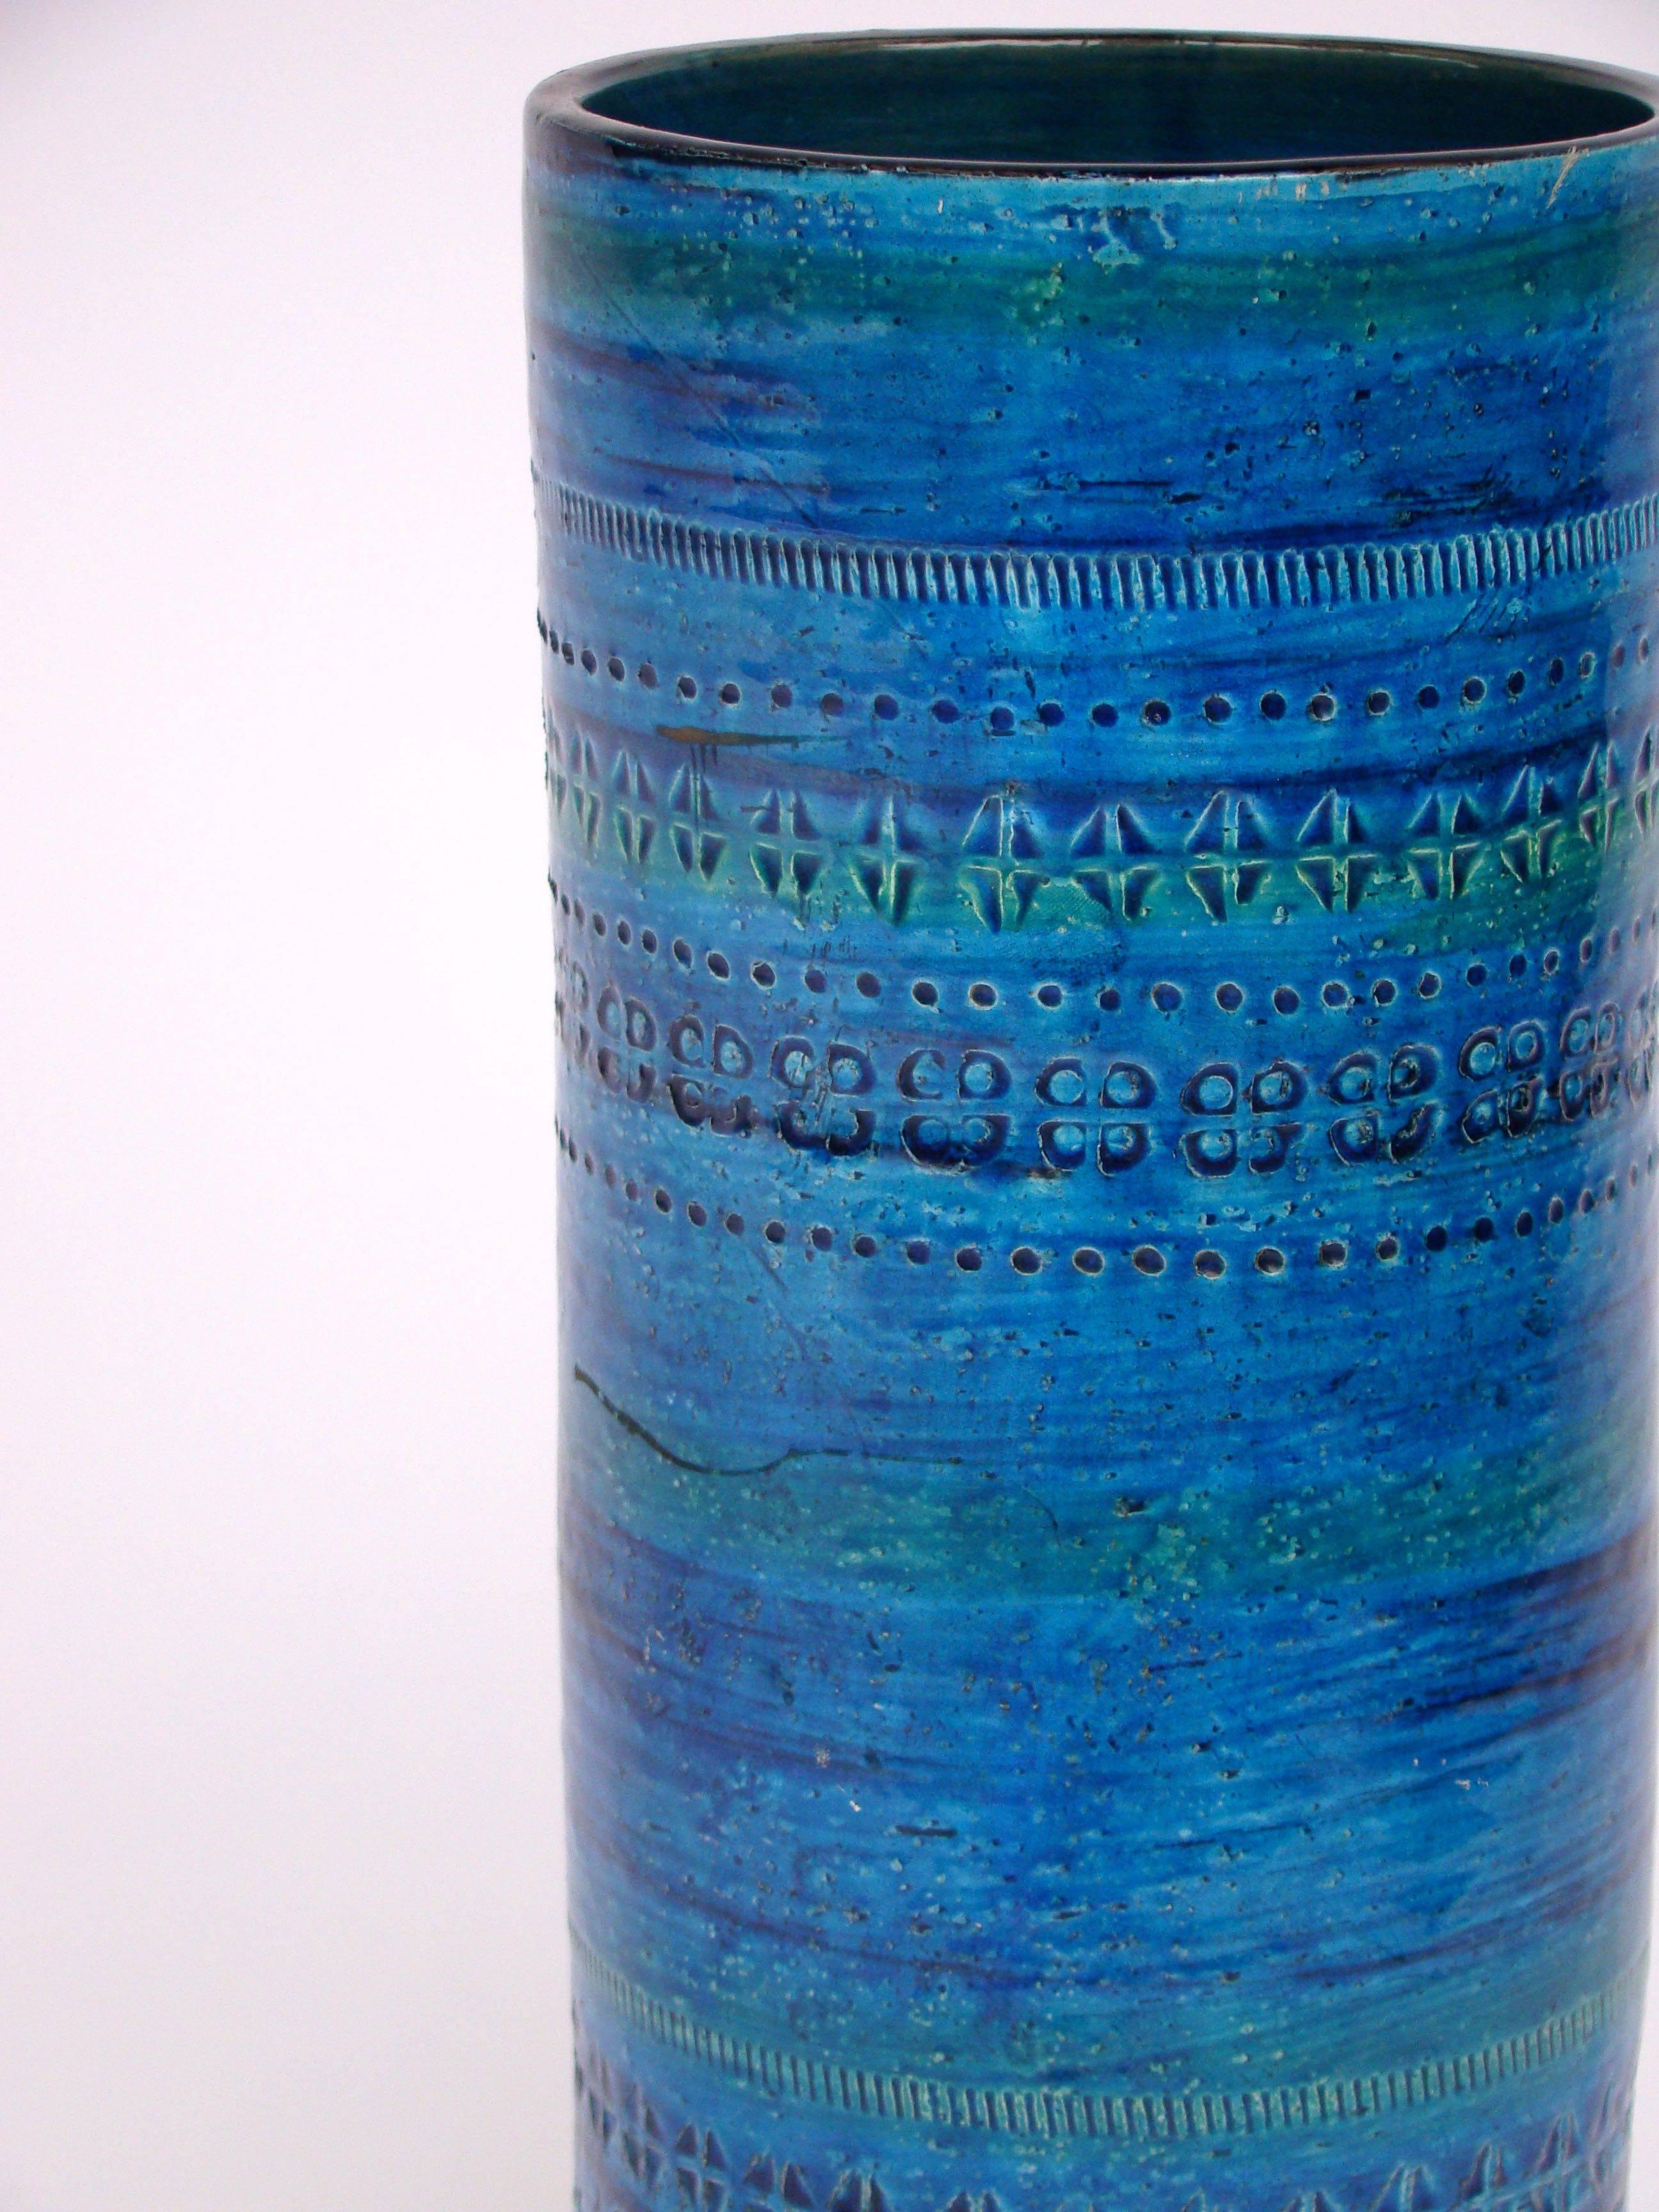 Handsome turquoise color vase designed by Bitossi's artistic director Aldo Londi in 1953, decorated with various striking geometric patterns running parallel on its surface.
 